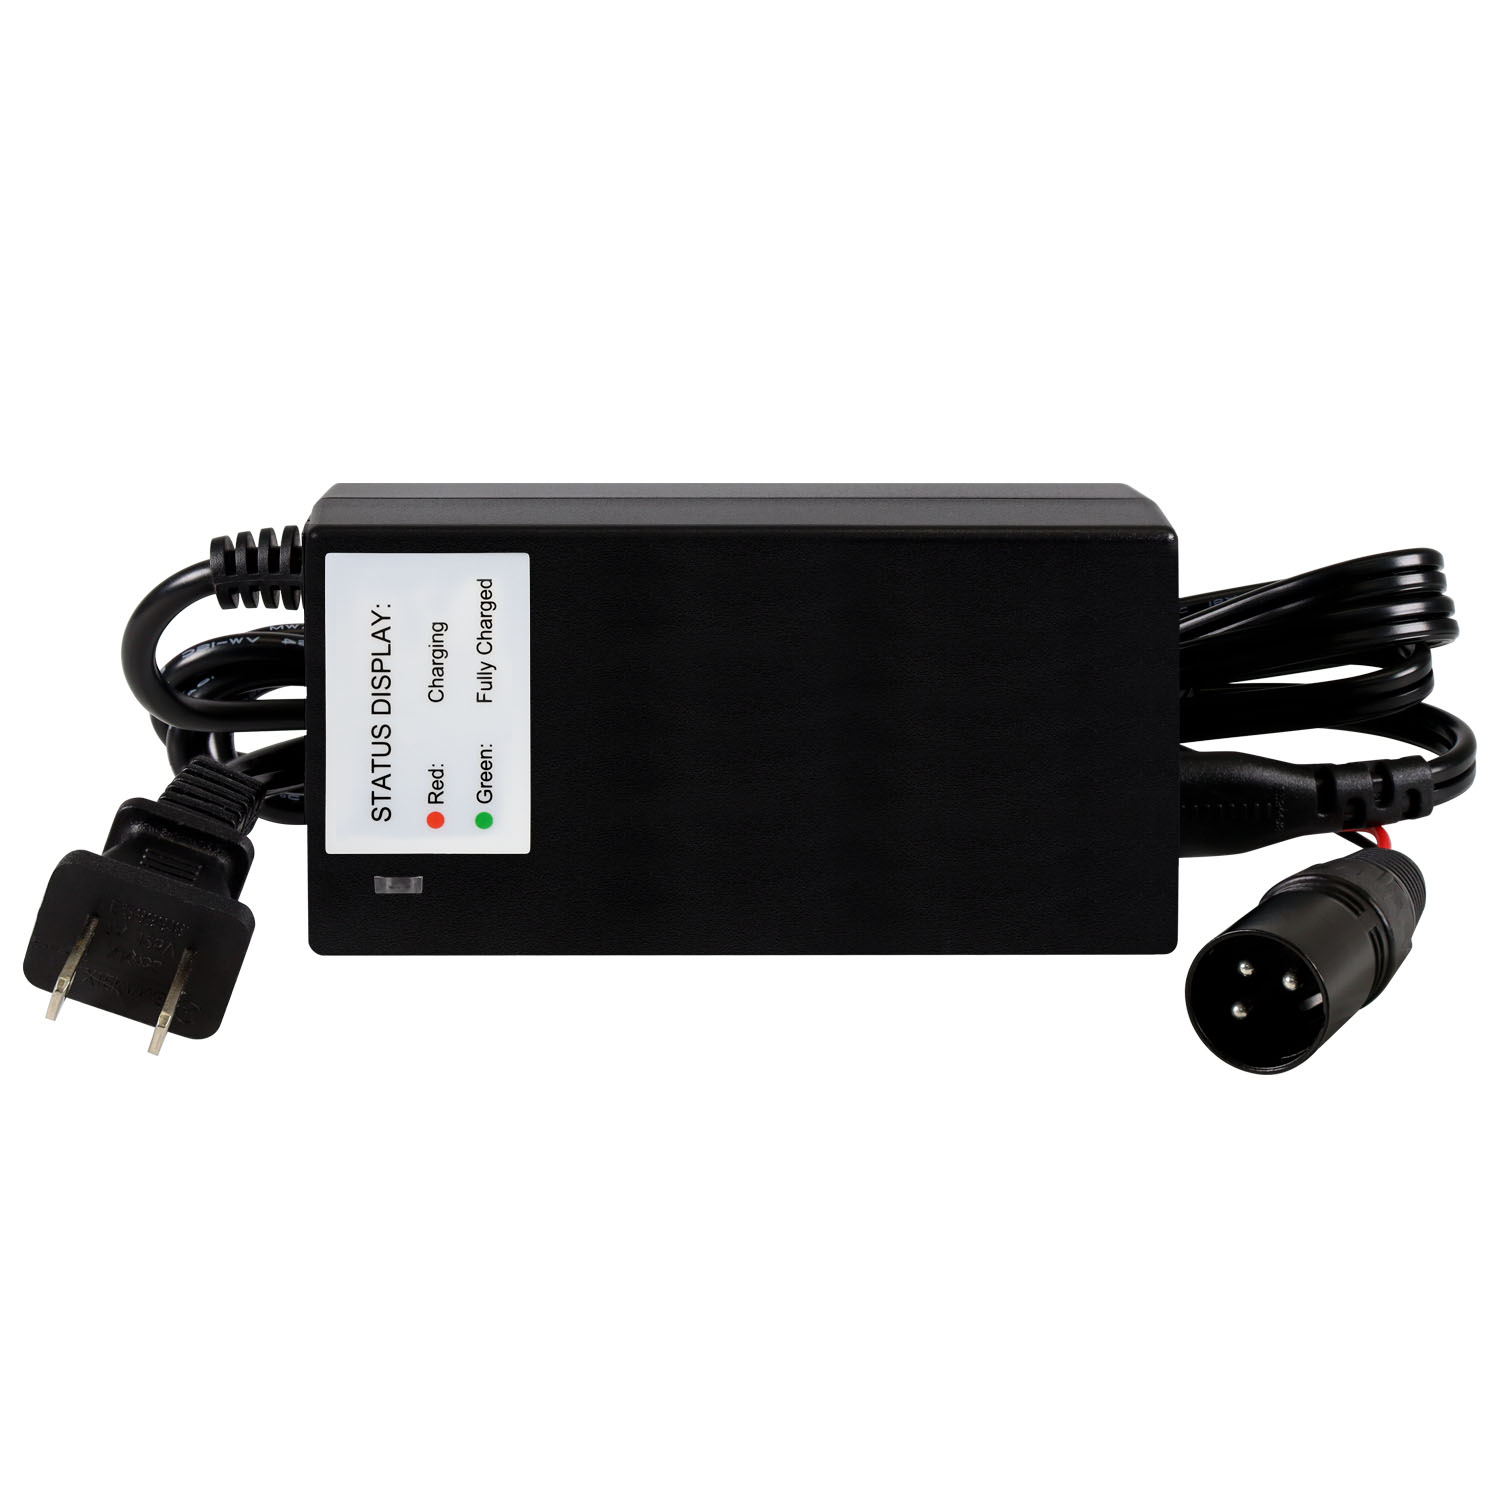 24V 2A BATTERY CHARGER FOR XCALIBER ELECTRIC SCOOTER AUTOMATIC 3 STAGE -  MightyMaxBattery